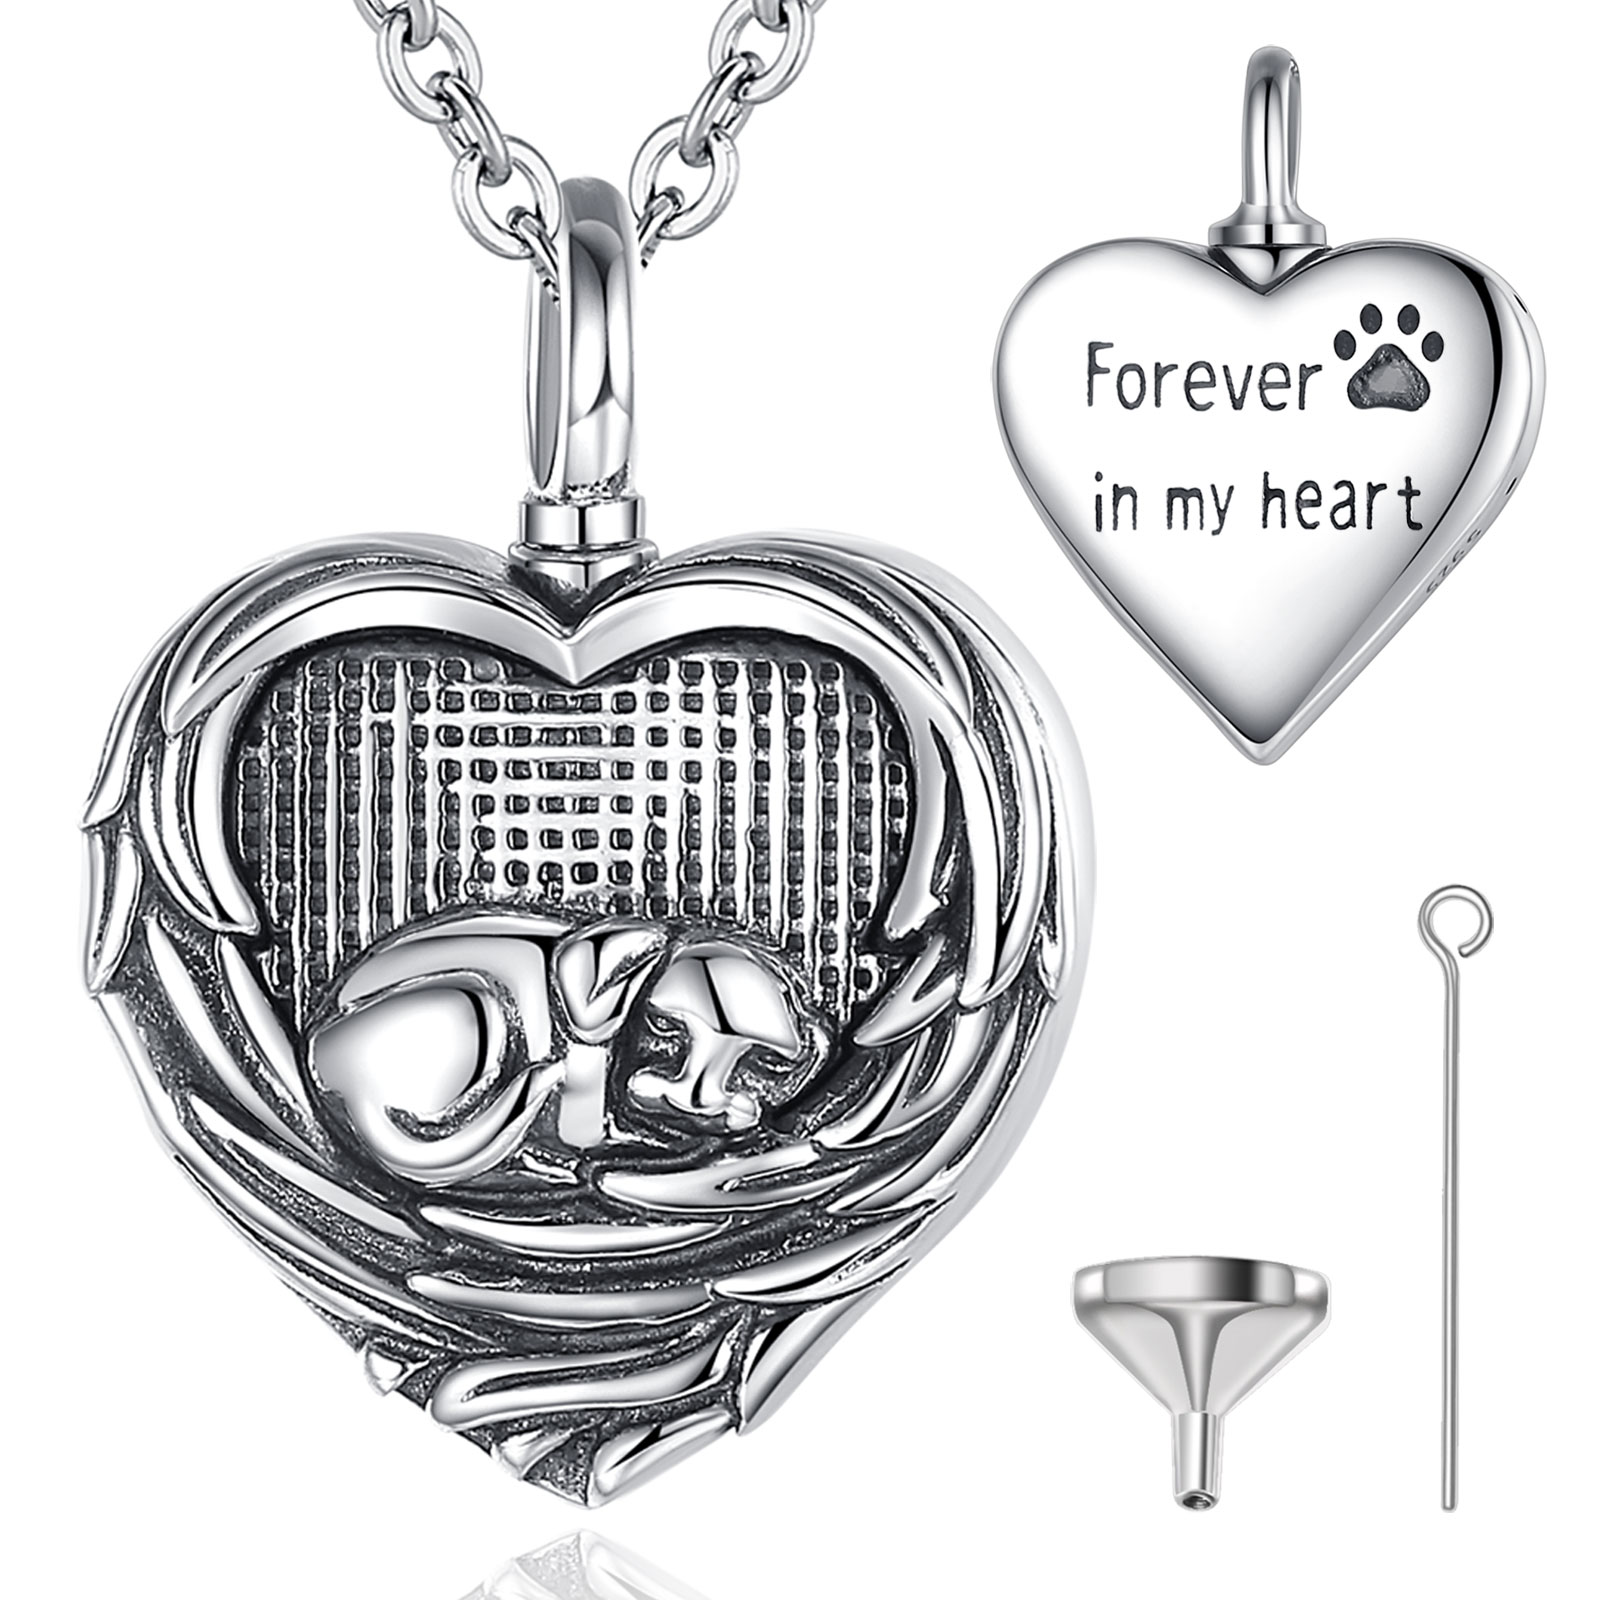 Merryshine Jewelry Heart Shaped S925 Sterling Silver Cremation Urn Necklaces for Ashes